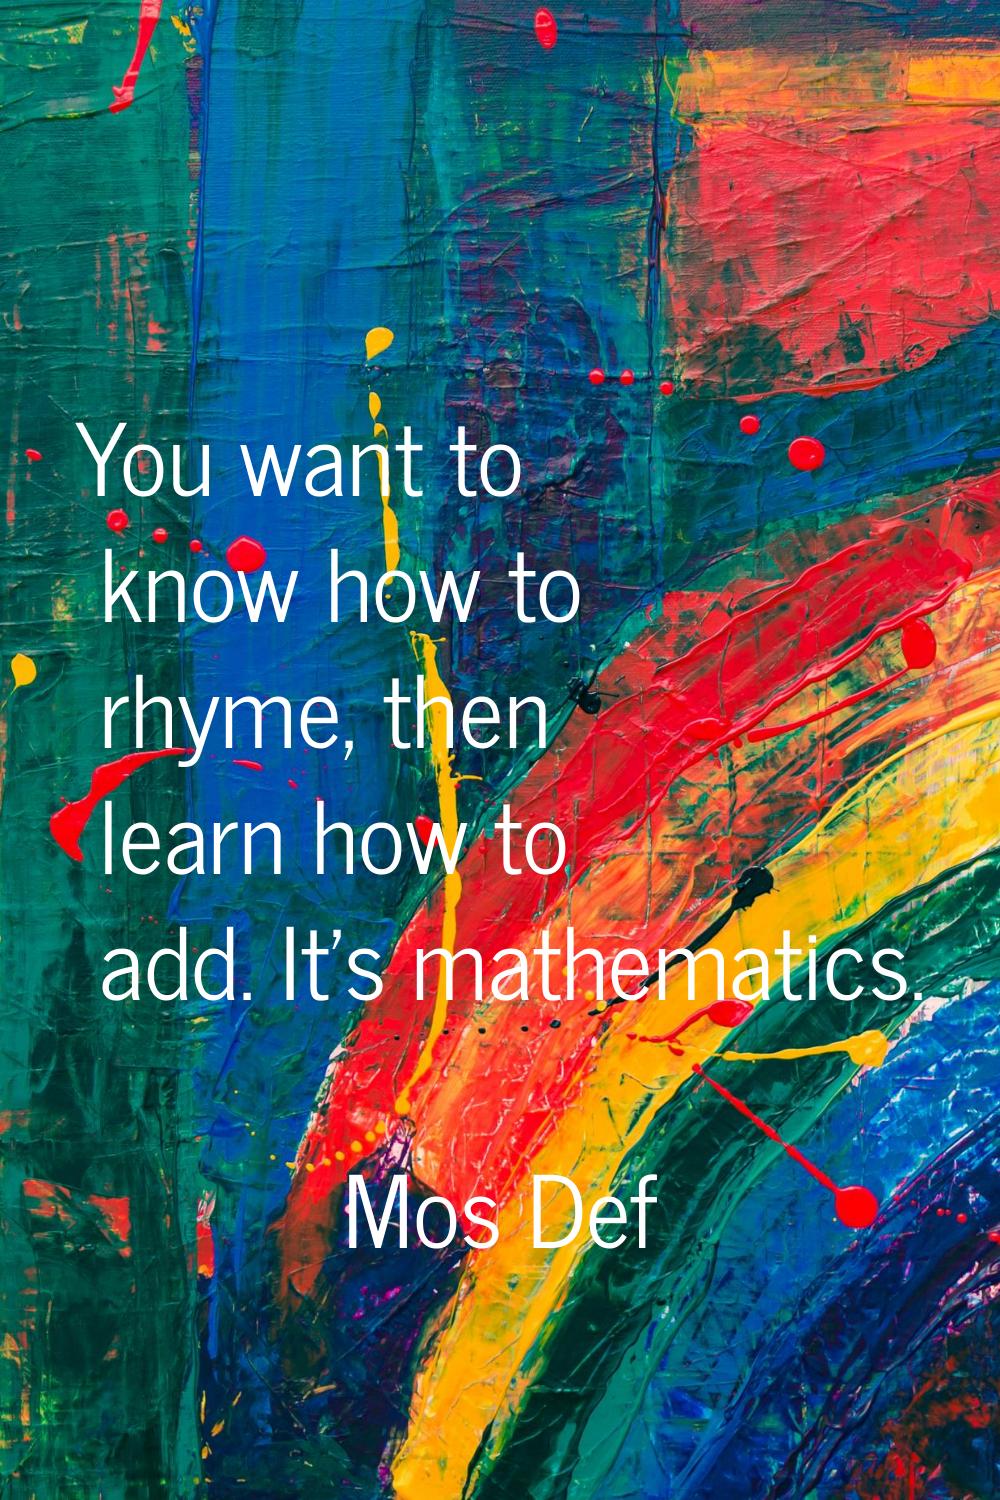 You want to know how to rhyme, then learn how to add. It's mathematics.